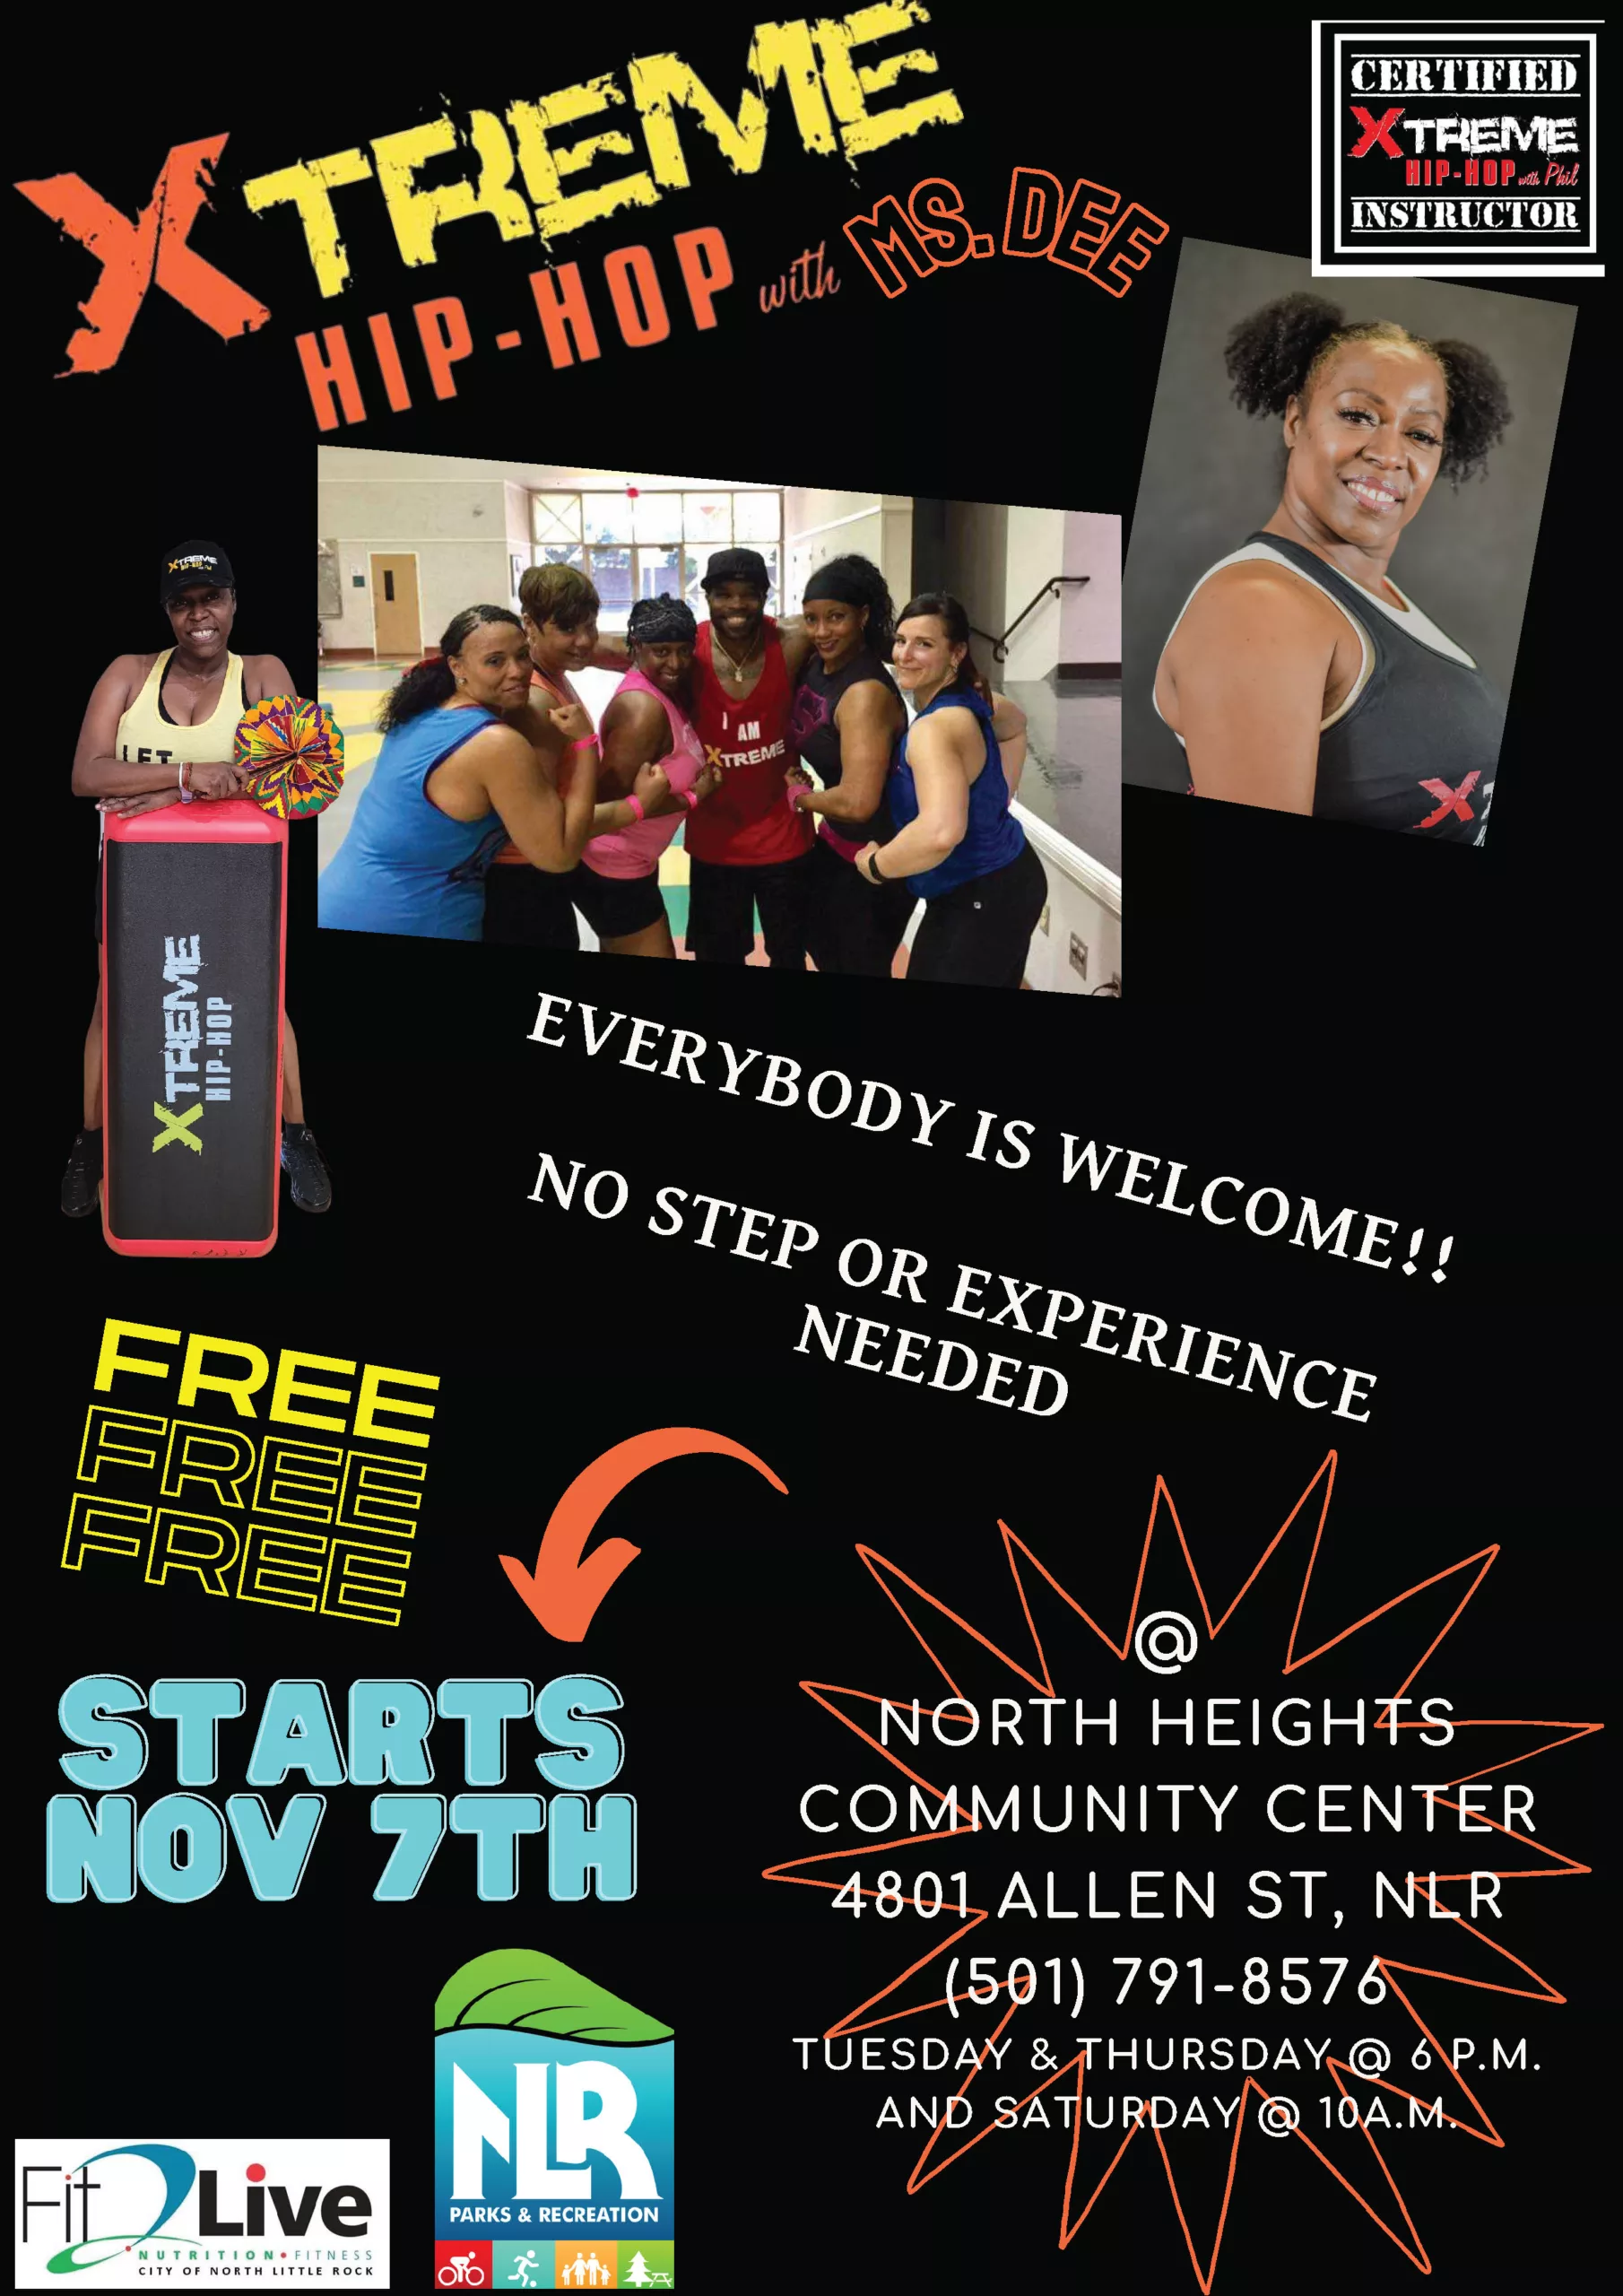 Extreme Hip-Hop Step Class at North Heights